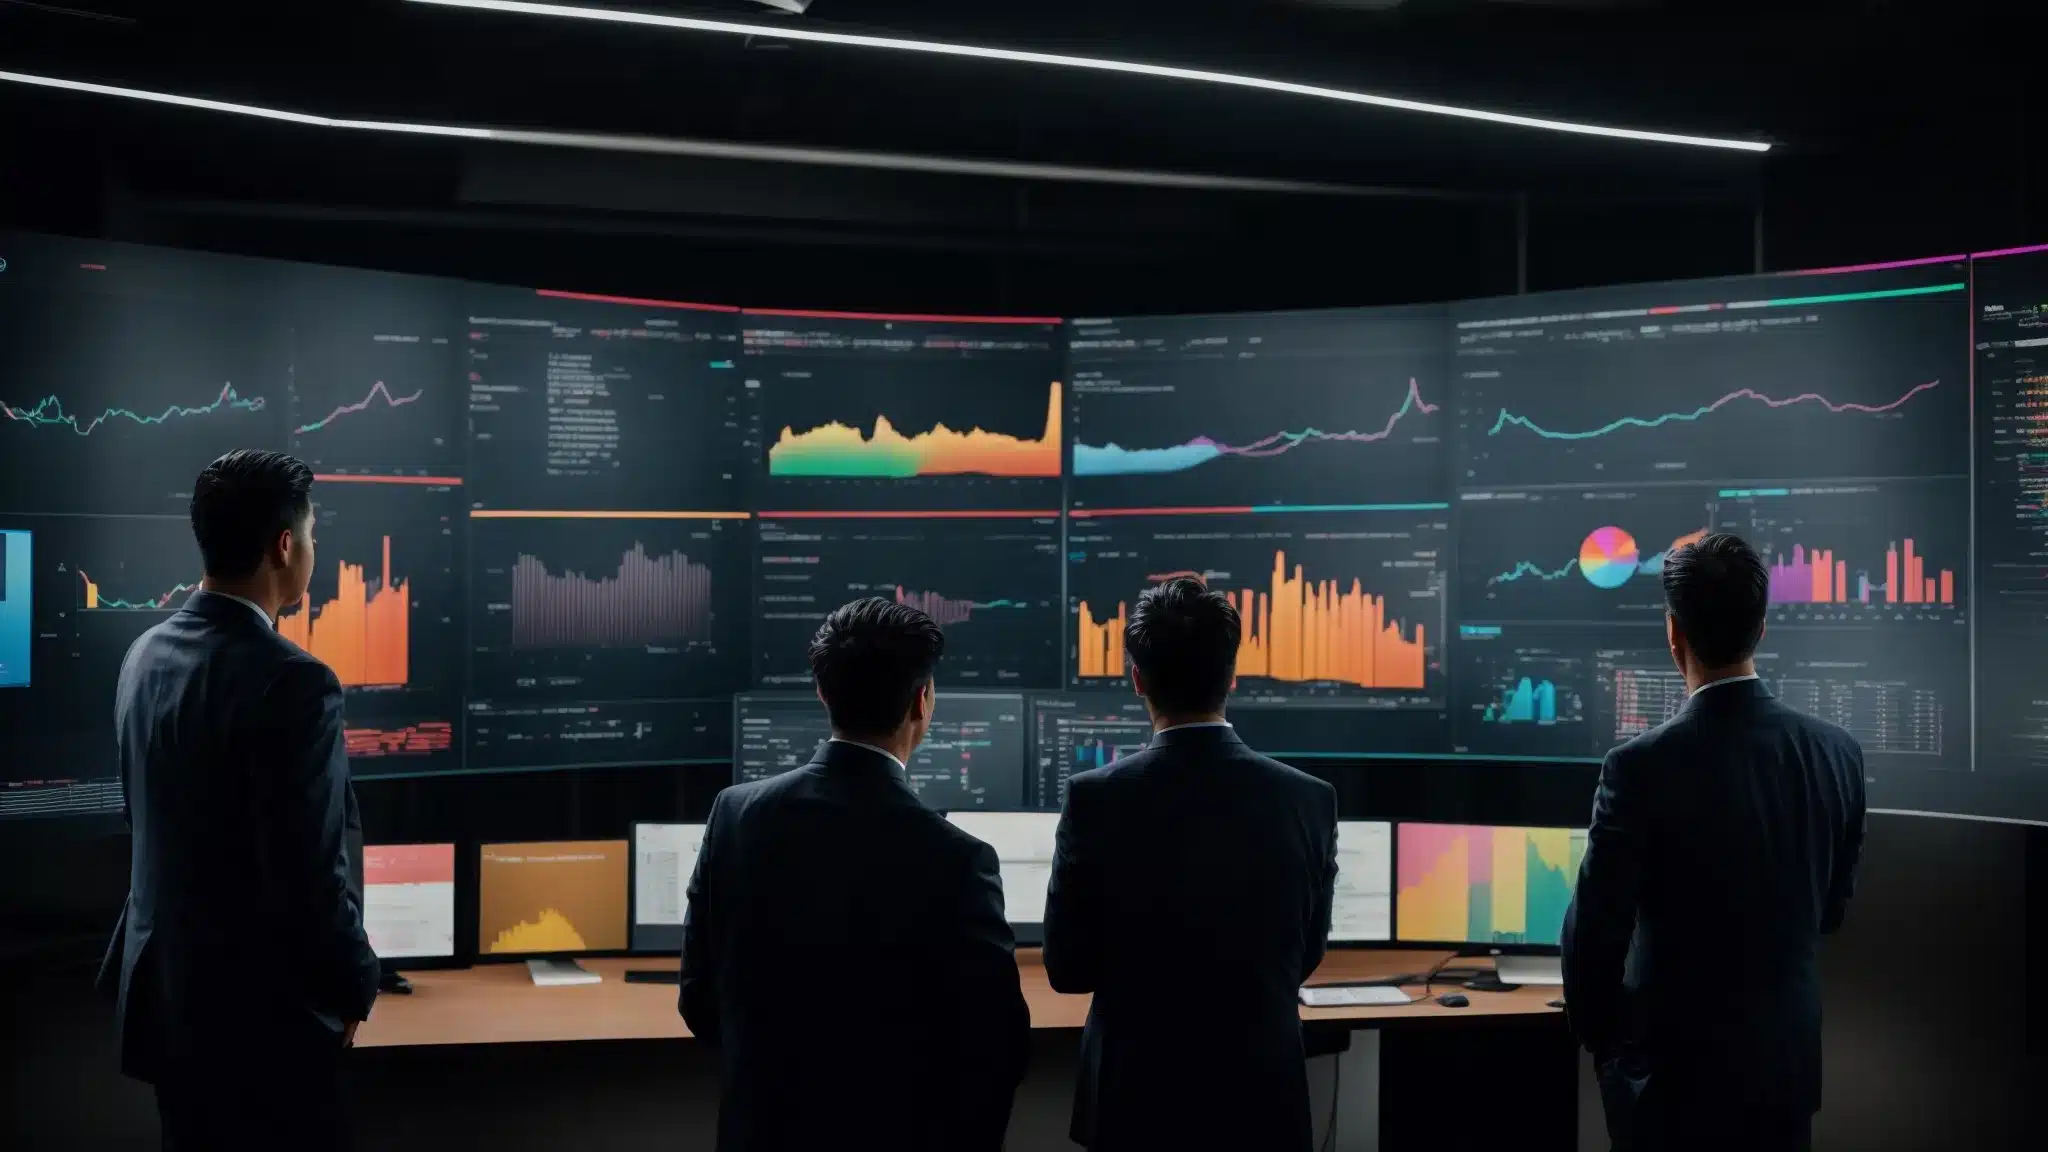 A Team Of Professionals Gathered Around A Large Screen Displaying Colorful Graphs And Customer Data.